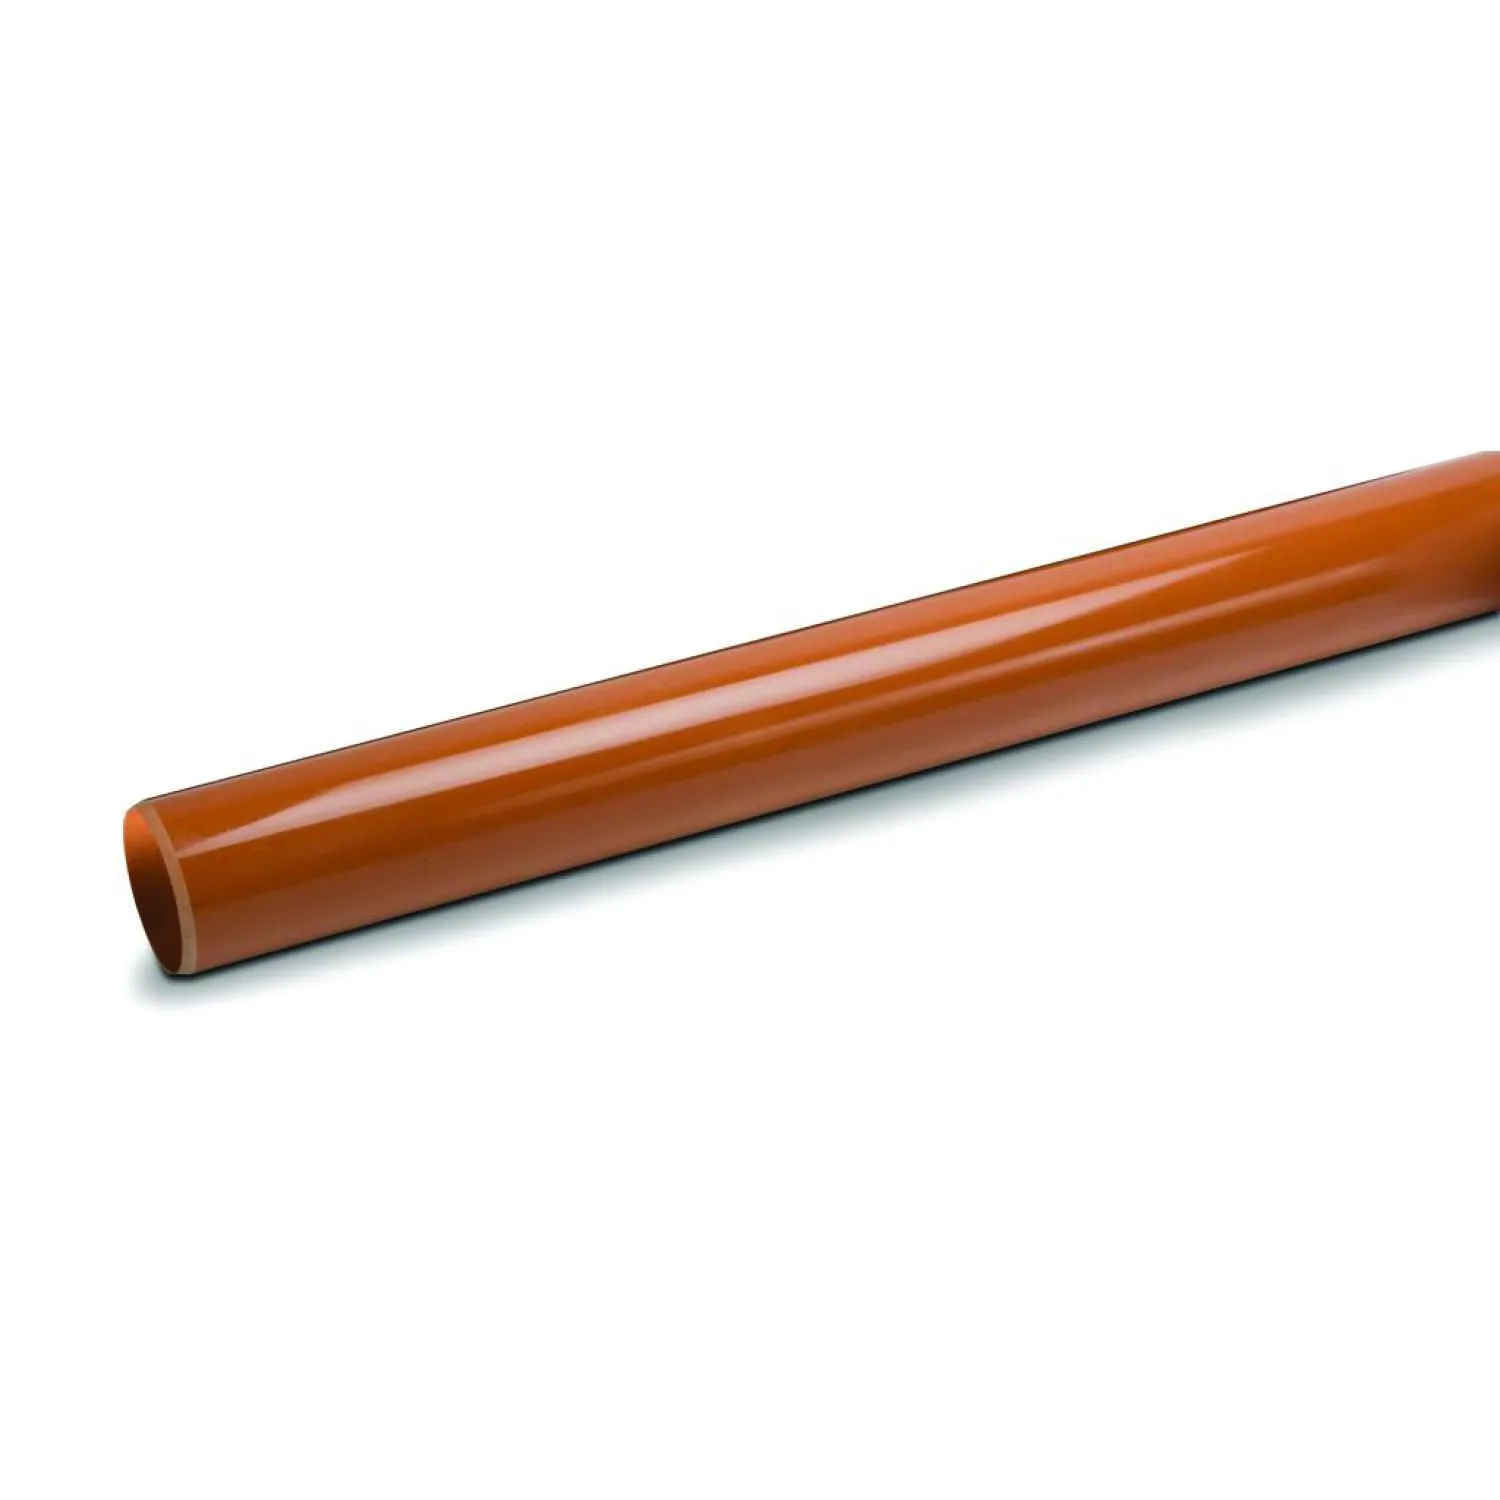 UG630 Polypipe 160mm x 3m Pipe Plain Ended Terracotta